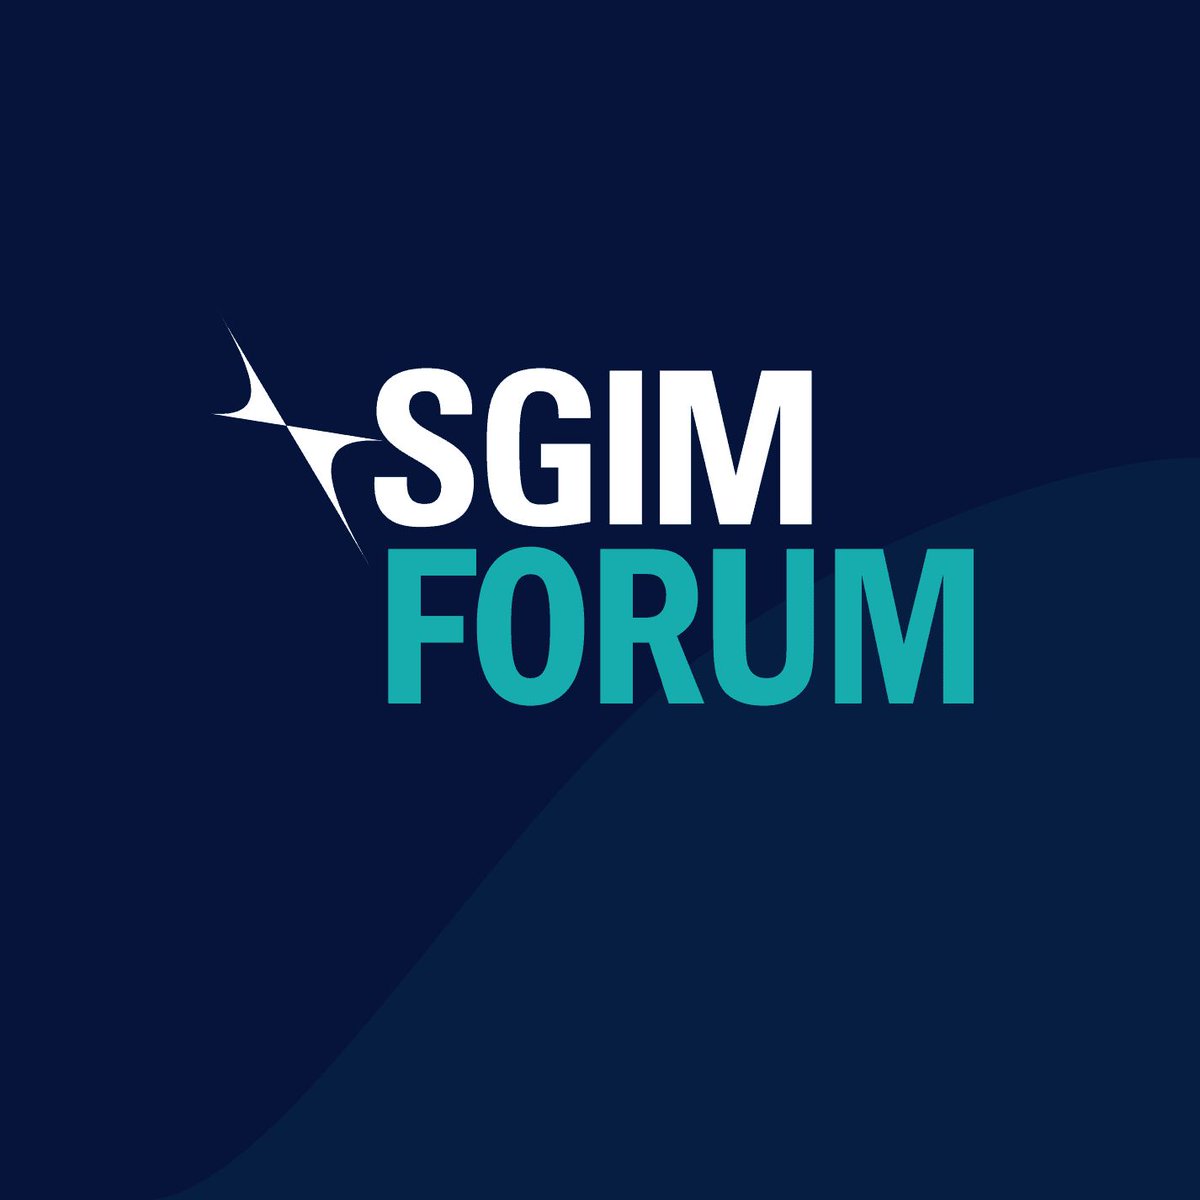 The April Issue of #SGIMForum is here! We have a great selection of articles for you this month - you don't want to miss it! #MedEd #SRFGuide #GIMLearn #SGIM24 #Diabetes #healthcare #genderinequity buff.ly/4aFuTkW